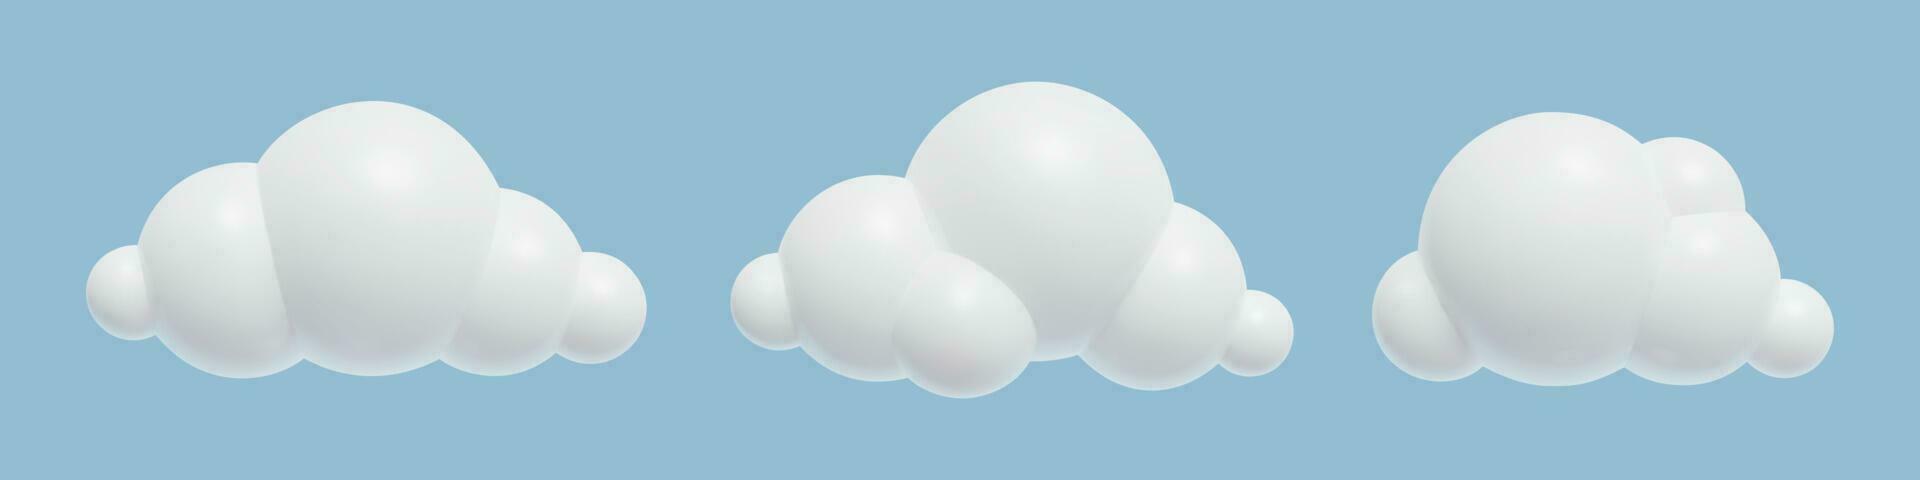 3d white Clouds set. Glossy Plastic cartoon three dimensional design elements collection. Relistic vector illustration.